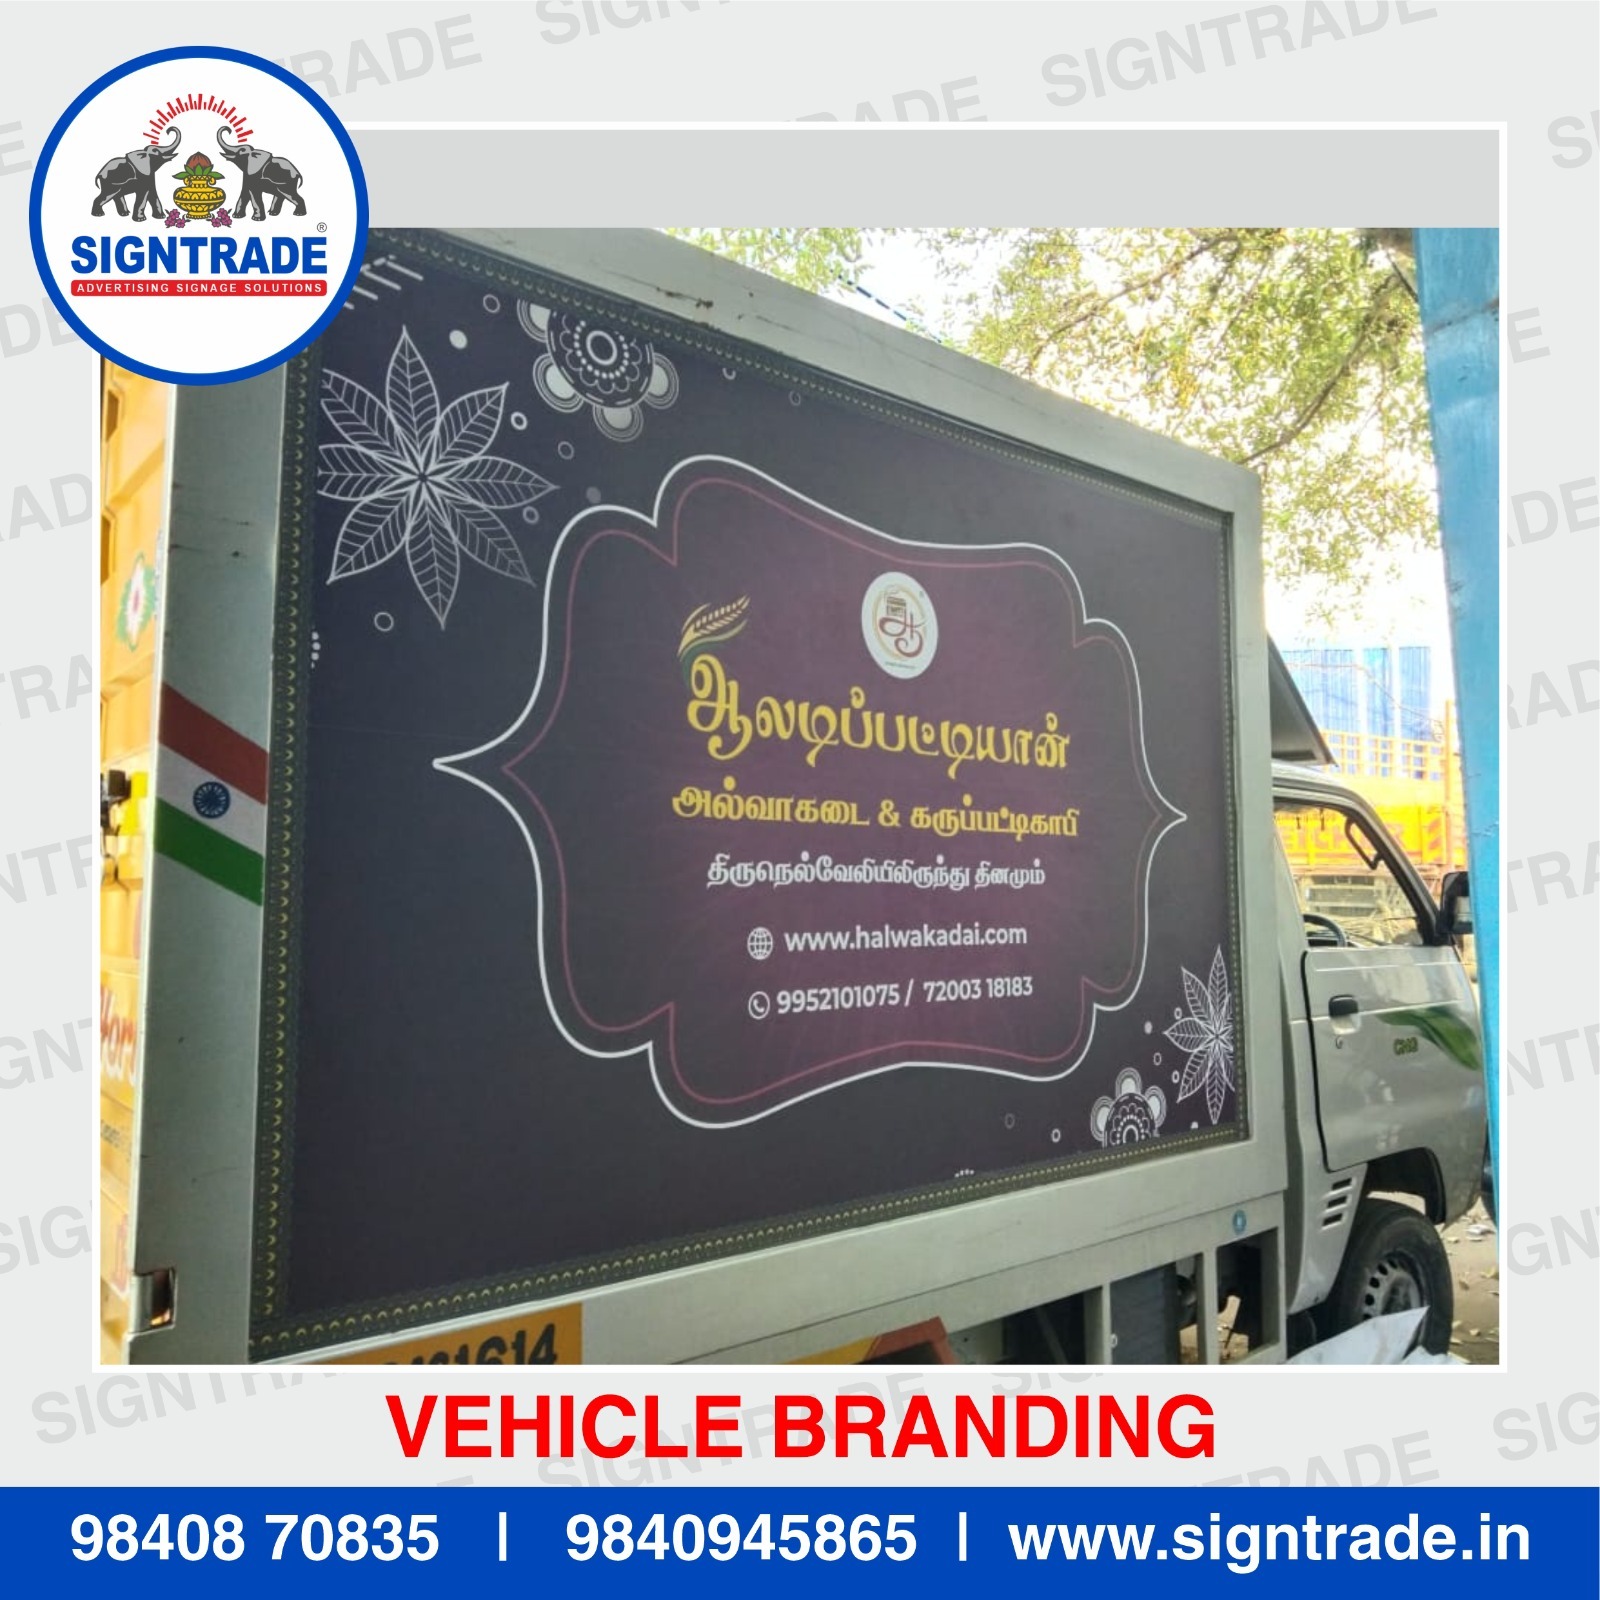 Vehicle Branding Services near me in Guindy